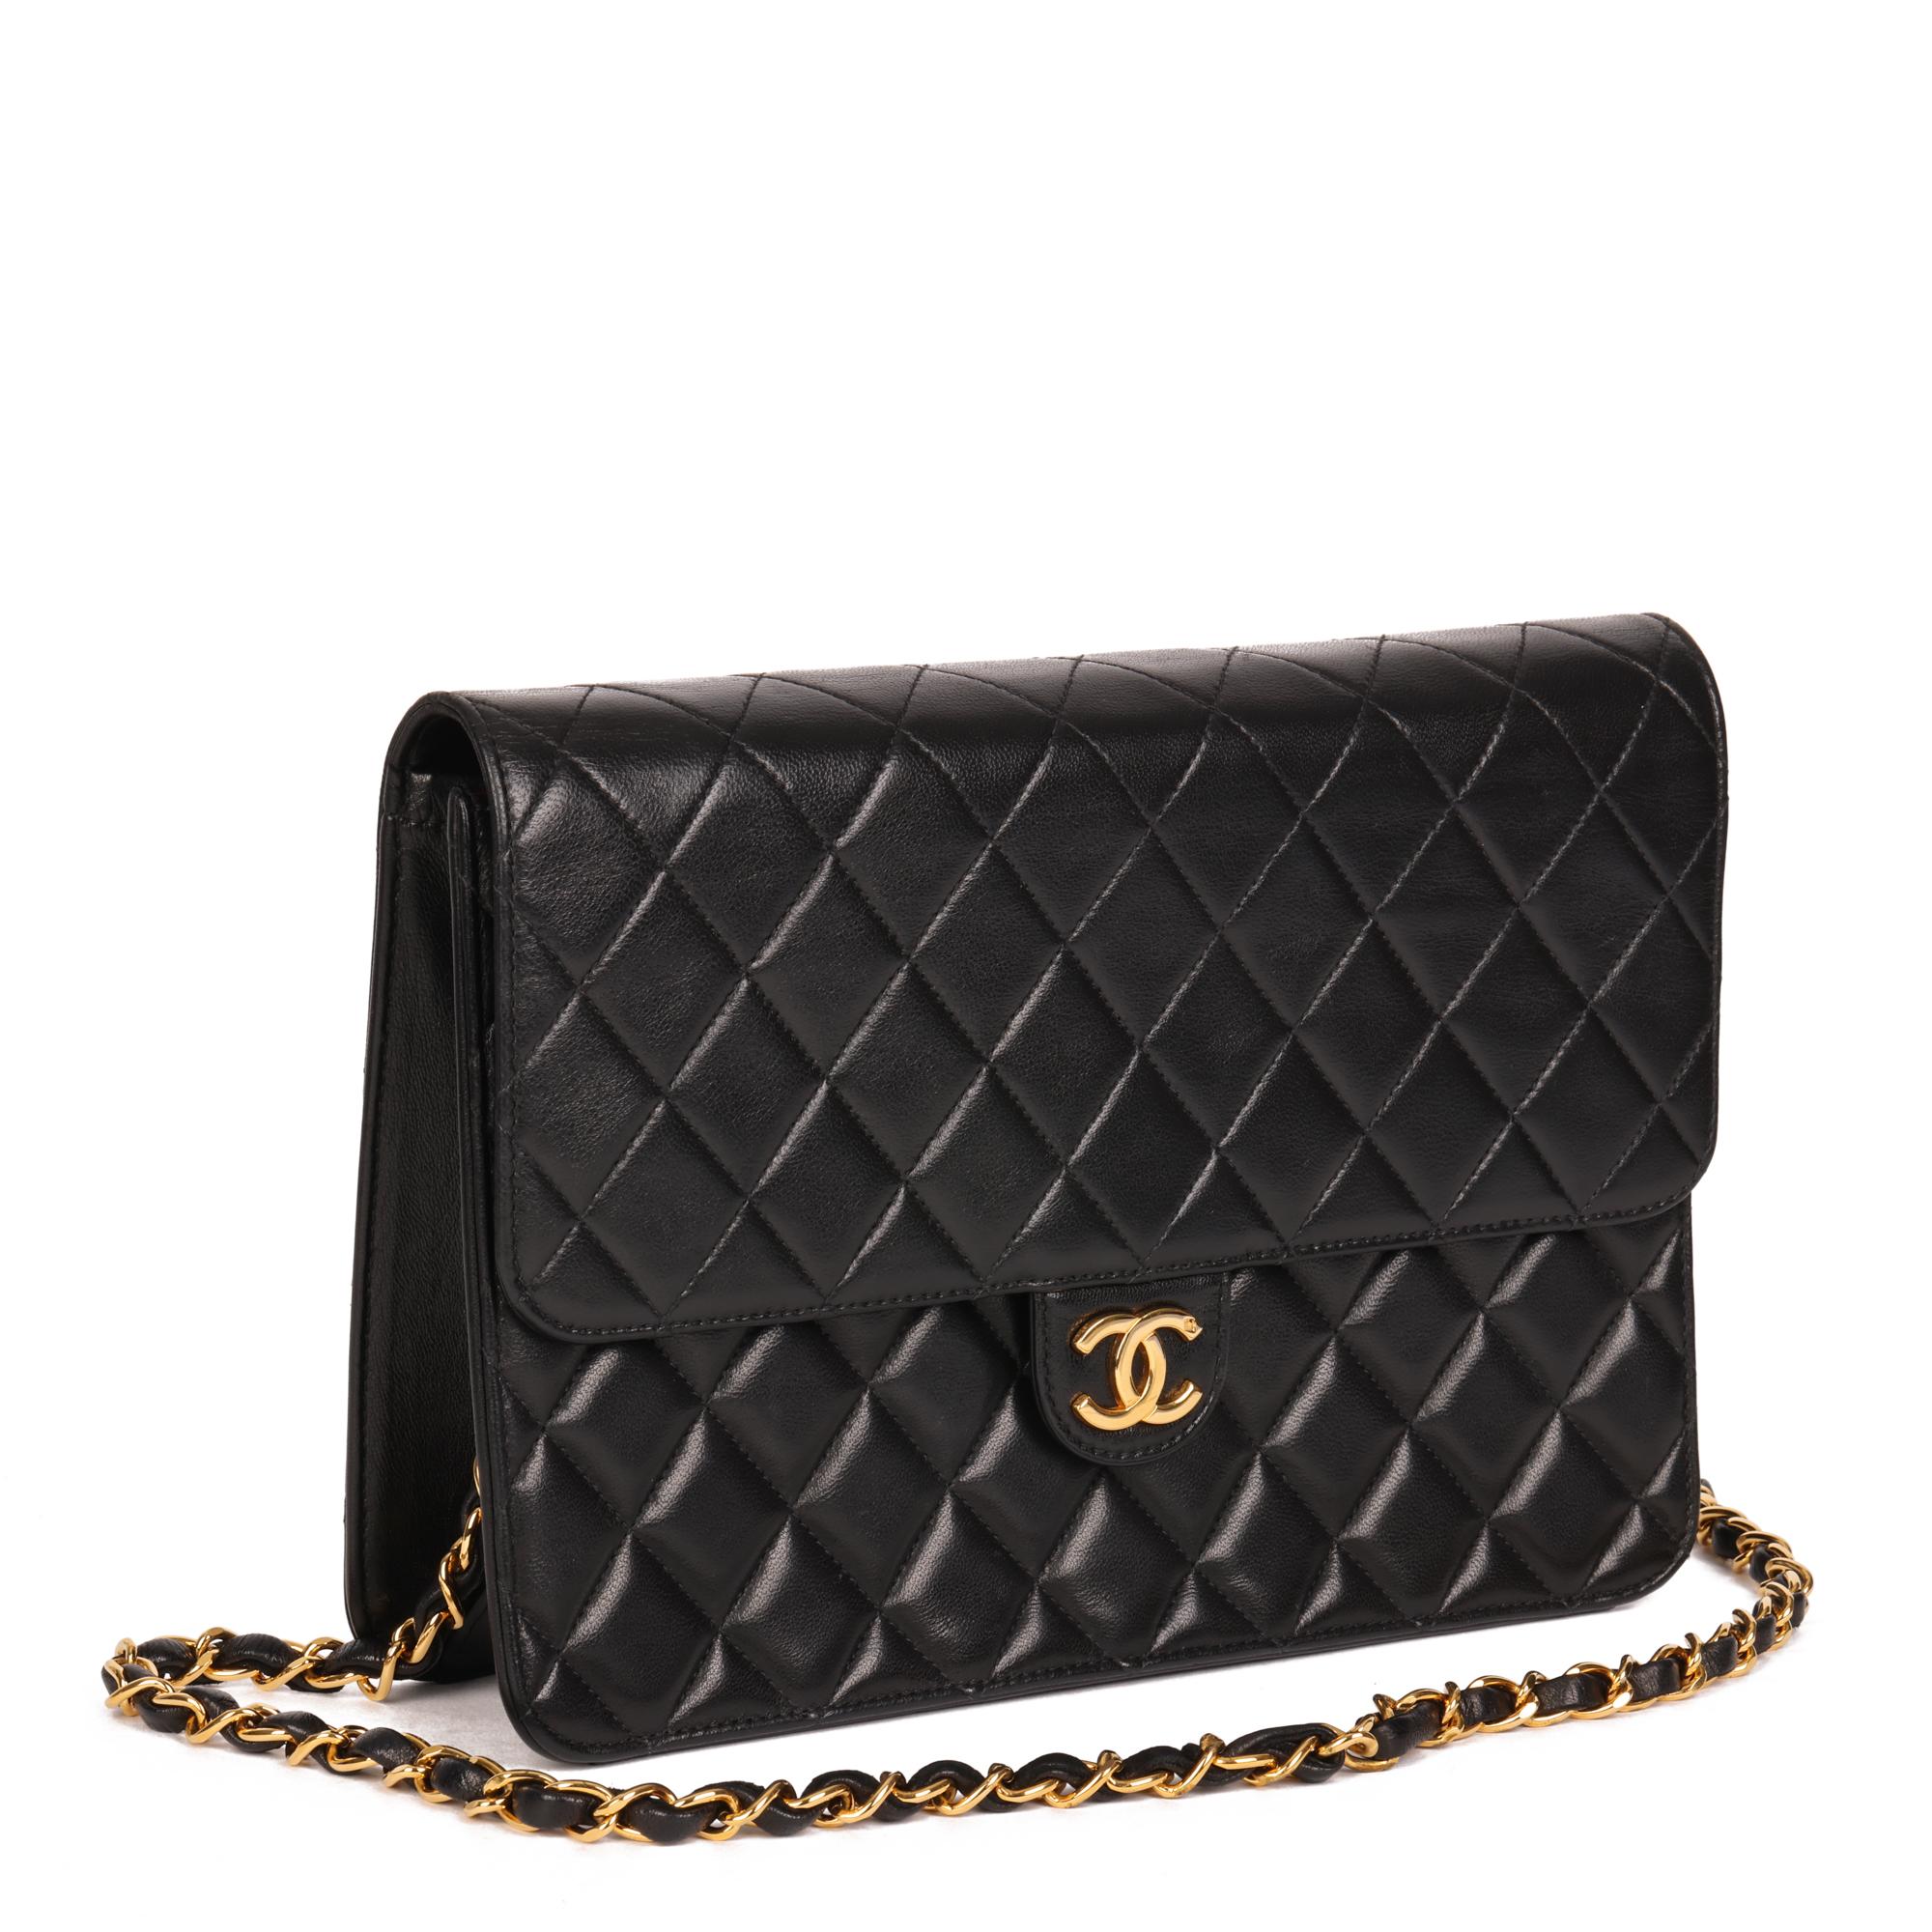 CHANEL
Black Quilted Lambskin Vintage Medium Classic Single Flap Bag 

Xupes Reference: HB4484
Serial Number: 4964982
Age (Circa): 1997
Accompanied By: Chanel Dust Bag, Authenticity Card
Authenticity Details: Authenticity Card, Serial Sticker (Made